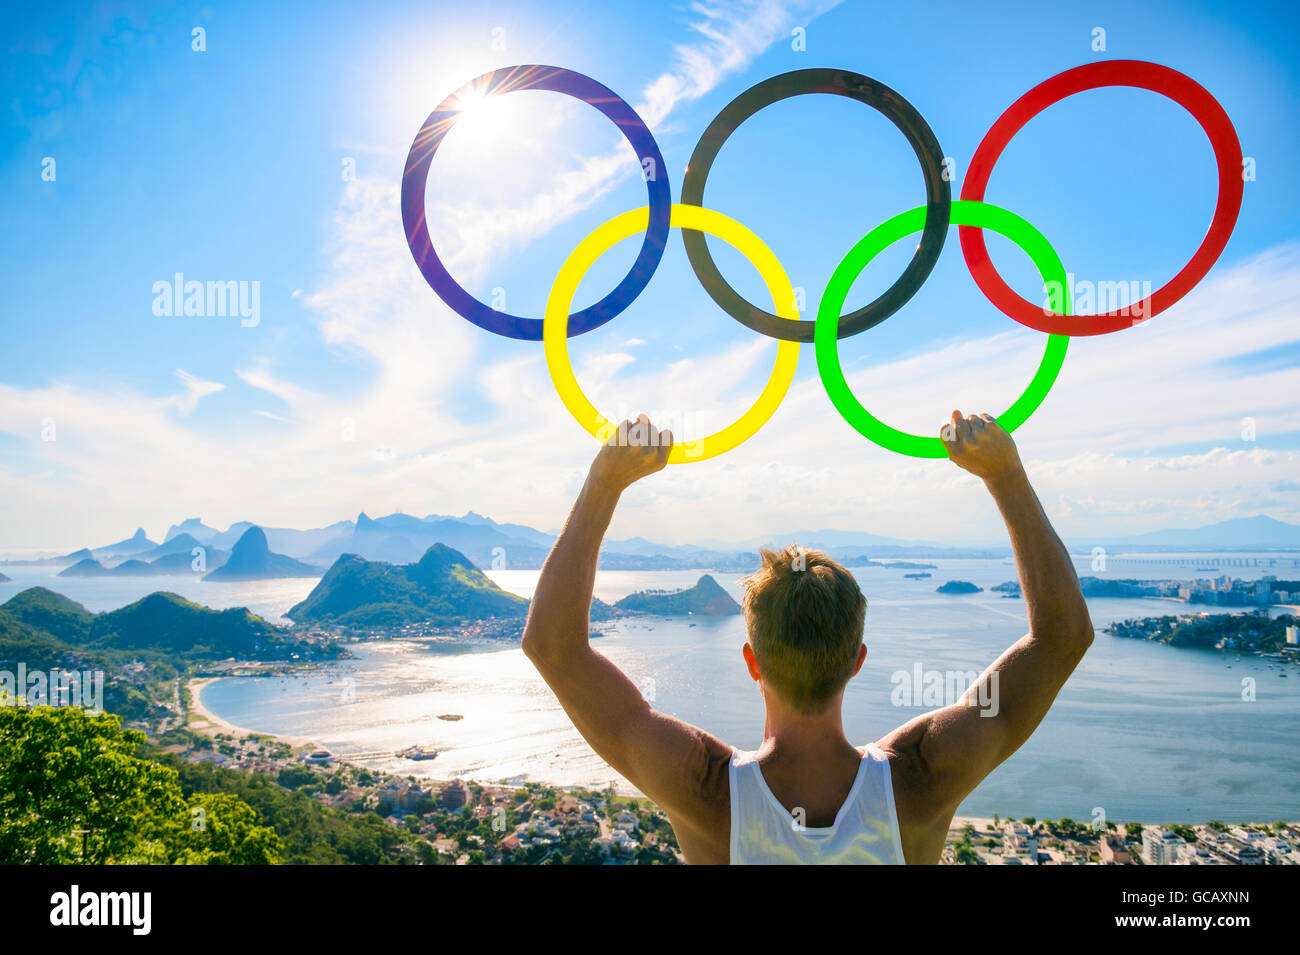 RIO DE JANEIRO - MARCH 21, 2016: An athlete holds Olympic rings under bright blue sky above the city skyline. Stock Photo